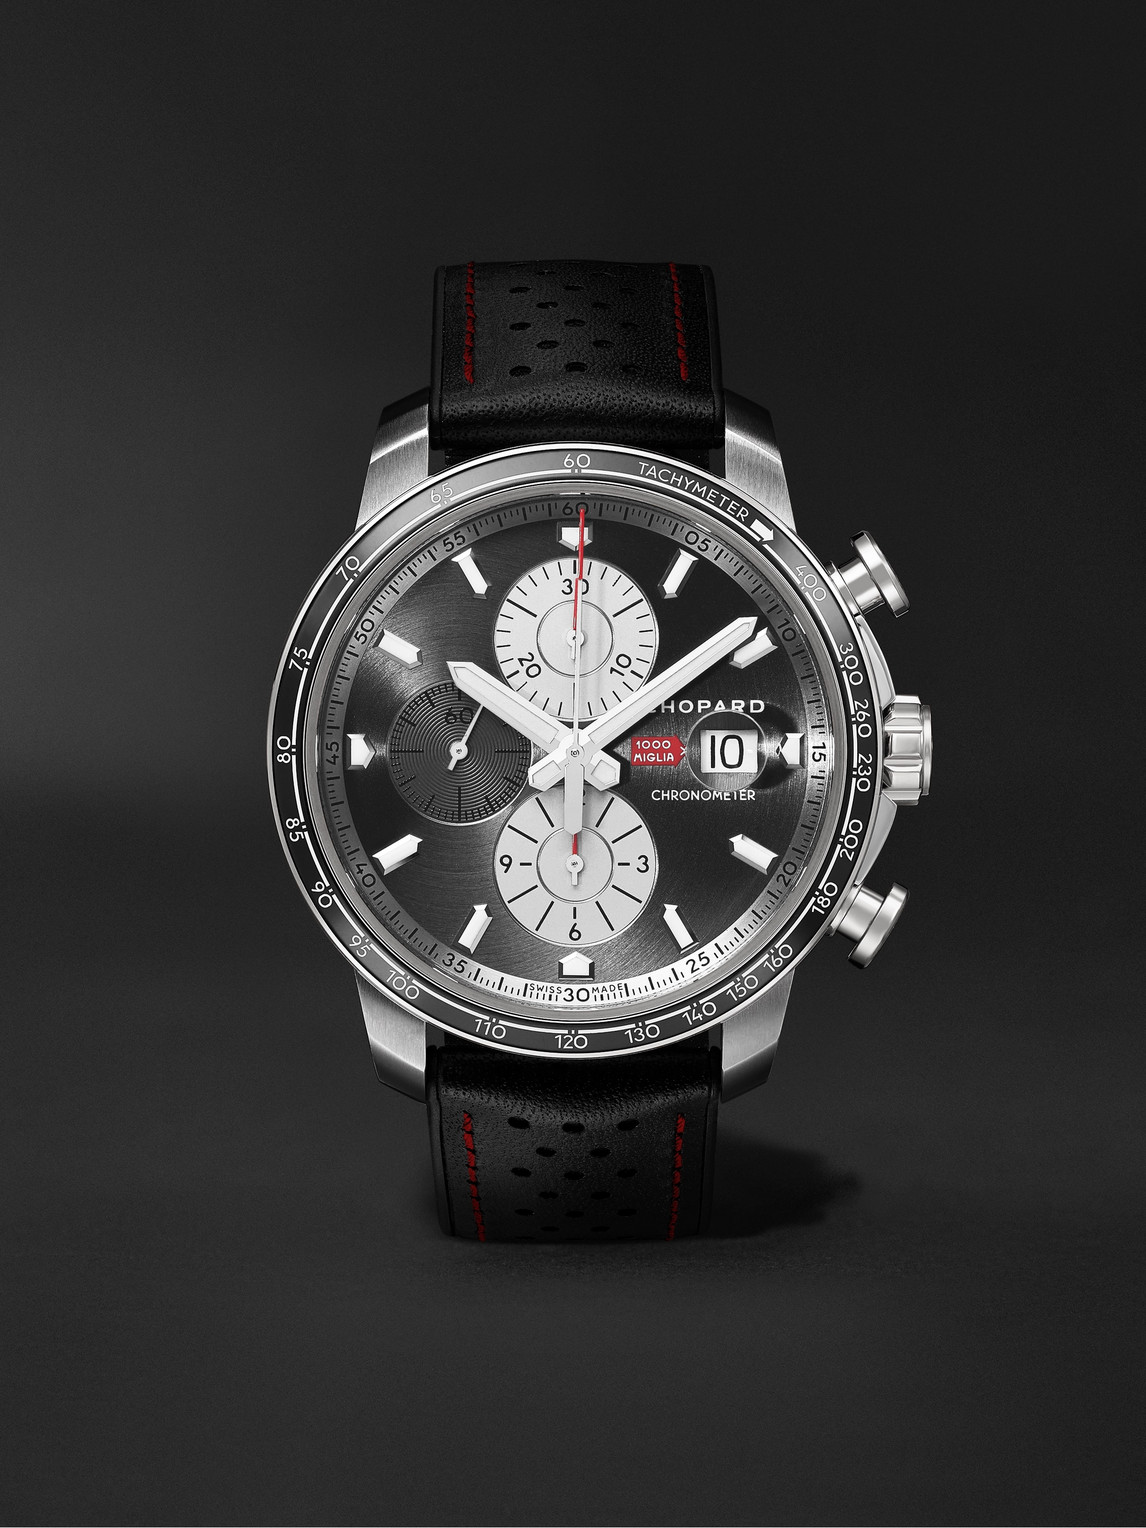 Chopard Mille Miglia 2021 Race Edition Limited Edition Automatic Chronograph 44mm Stainless Steel and Leather Watch, Ref. No. 168571-3009